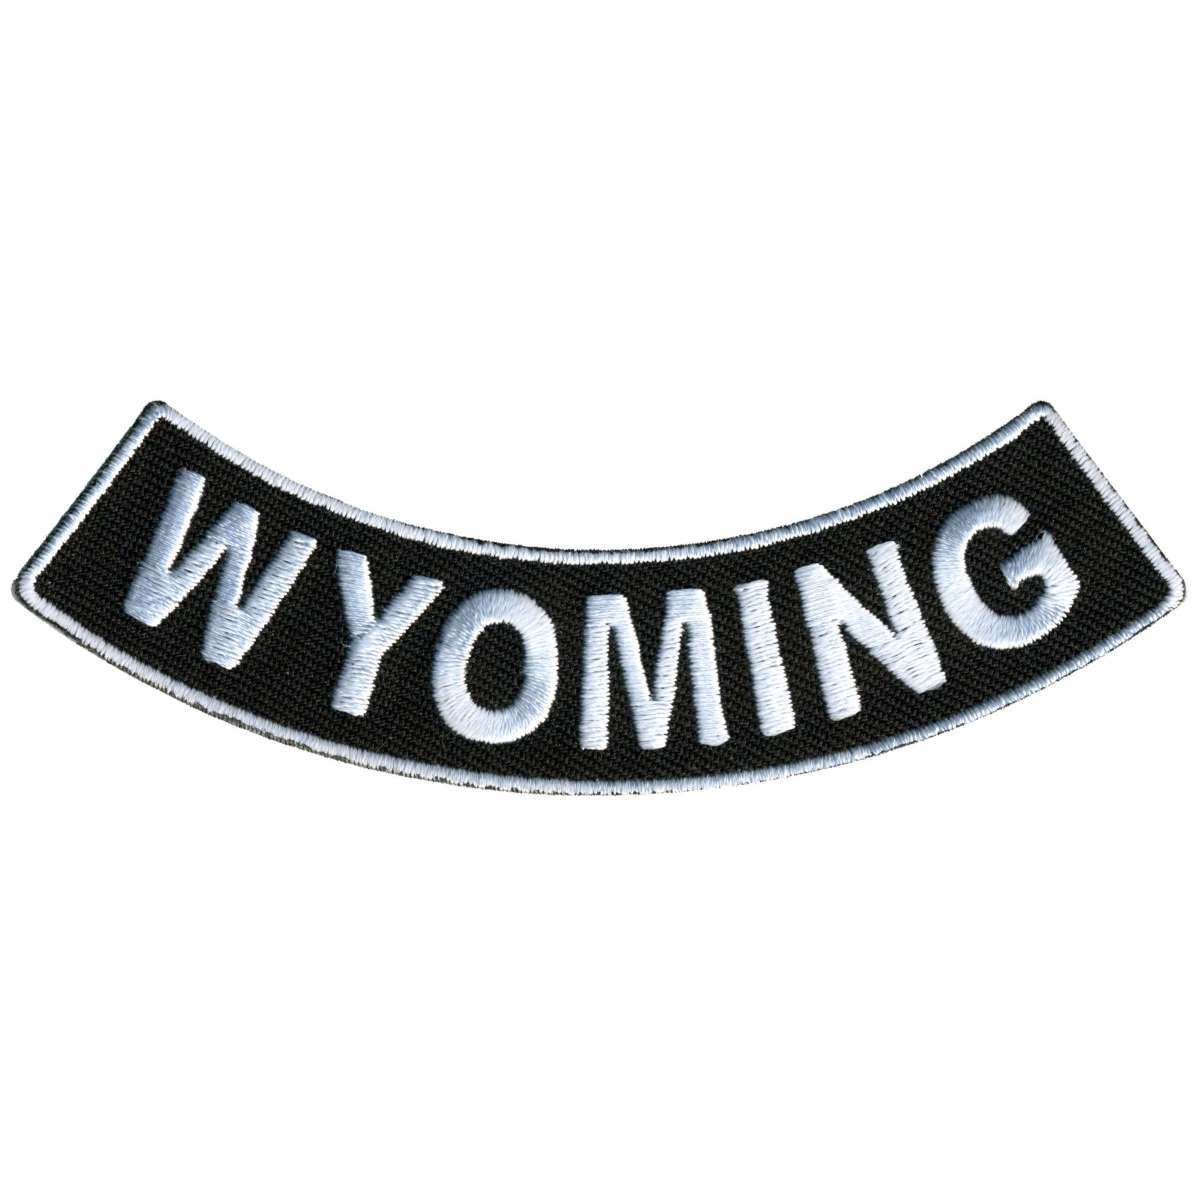 Hot Leathers Wyoming 4” X 1” Bottom Rocker Patch PPM5100